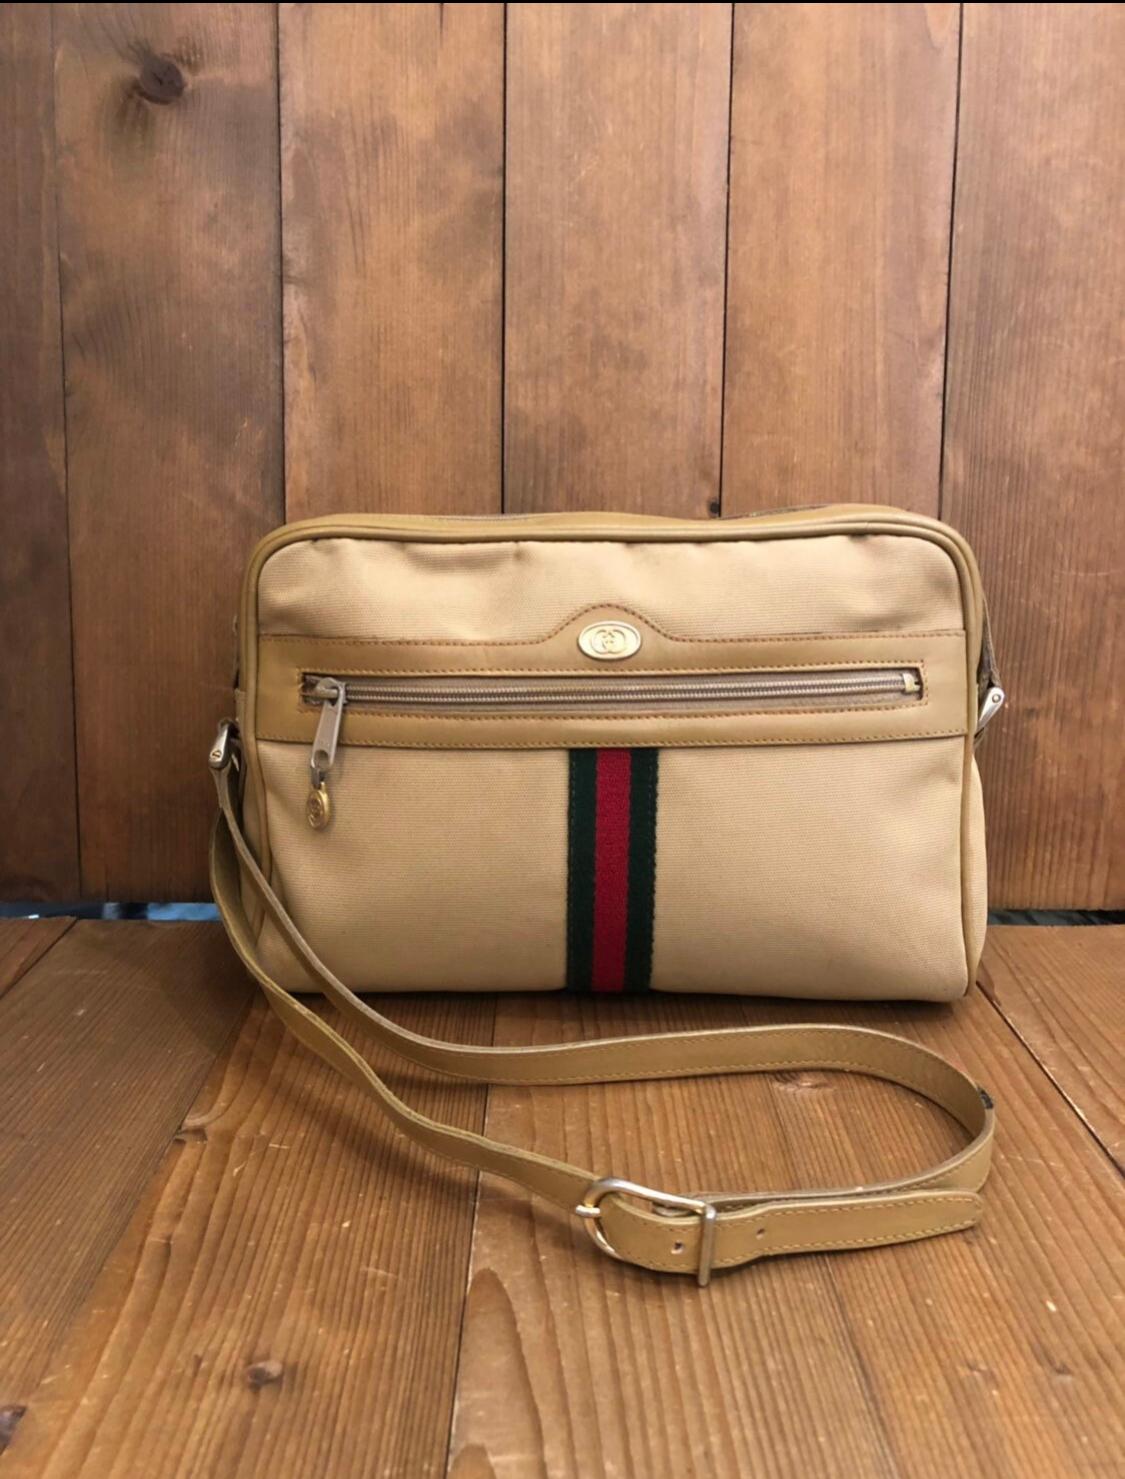 This vintage GUCCI crossbody bag is crafted of nylon in beige decorated with Gucci’s iconic greed/red band. Top zipper closure opens to coated interior in brown featuring a zippered pocket. This crossbody also features a front zippered pocket. Made